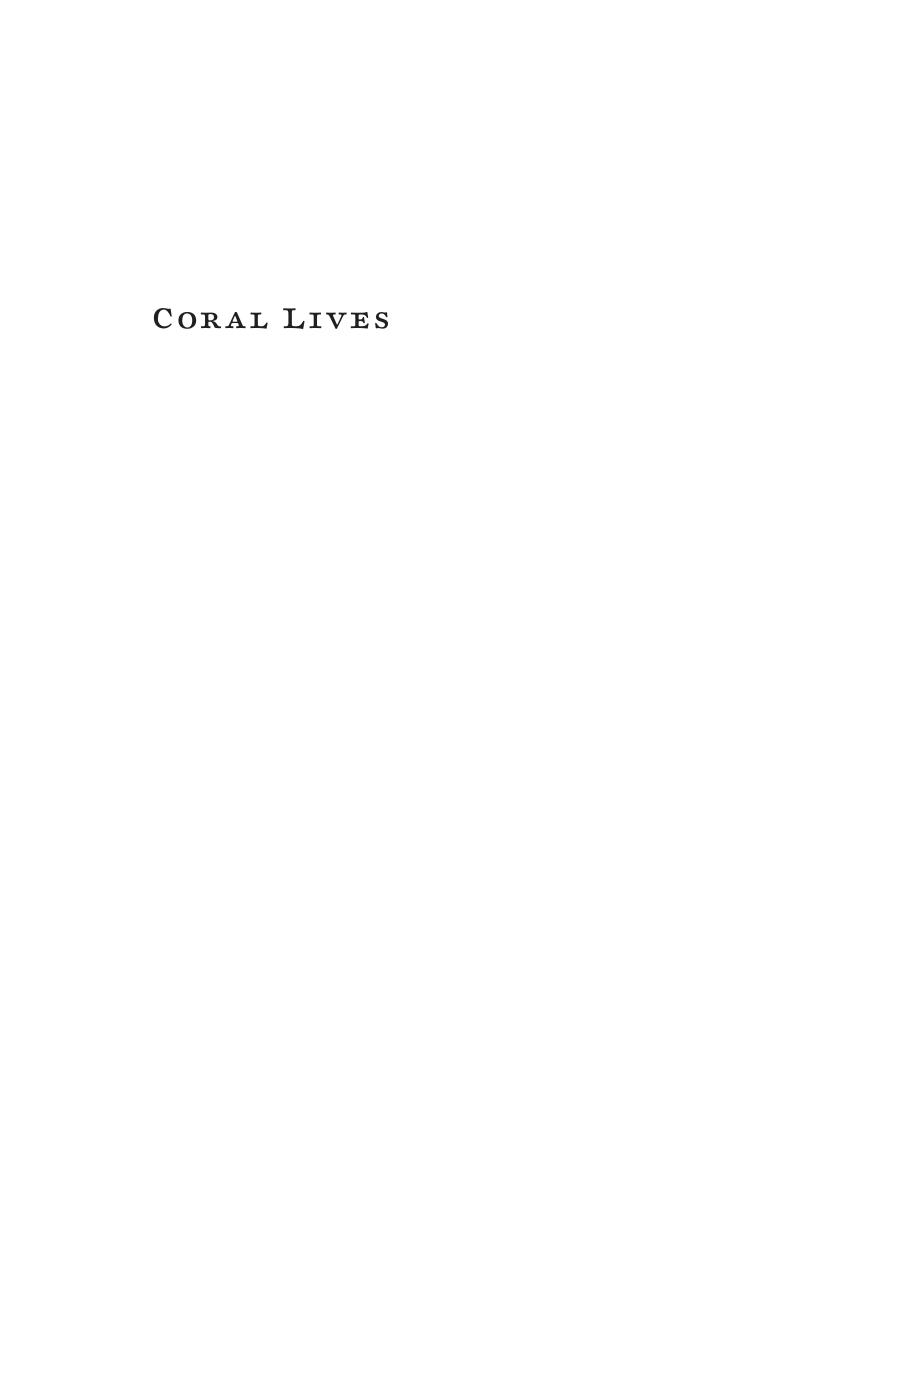 Coral Lives: Literature, Labor, and the Making of America by Michele Currie Navakas